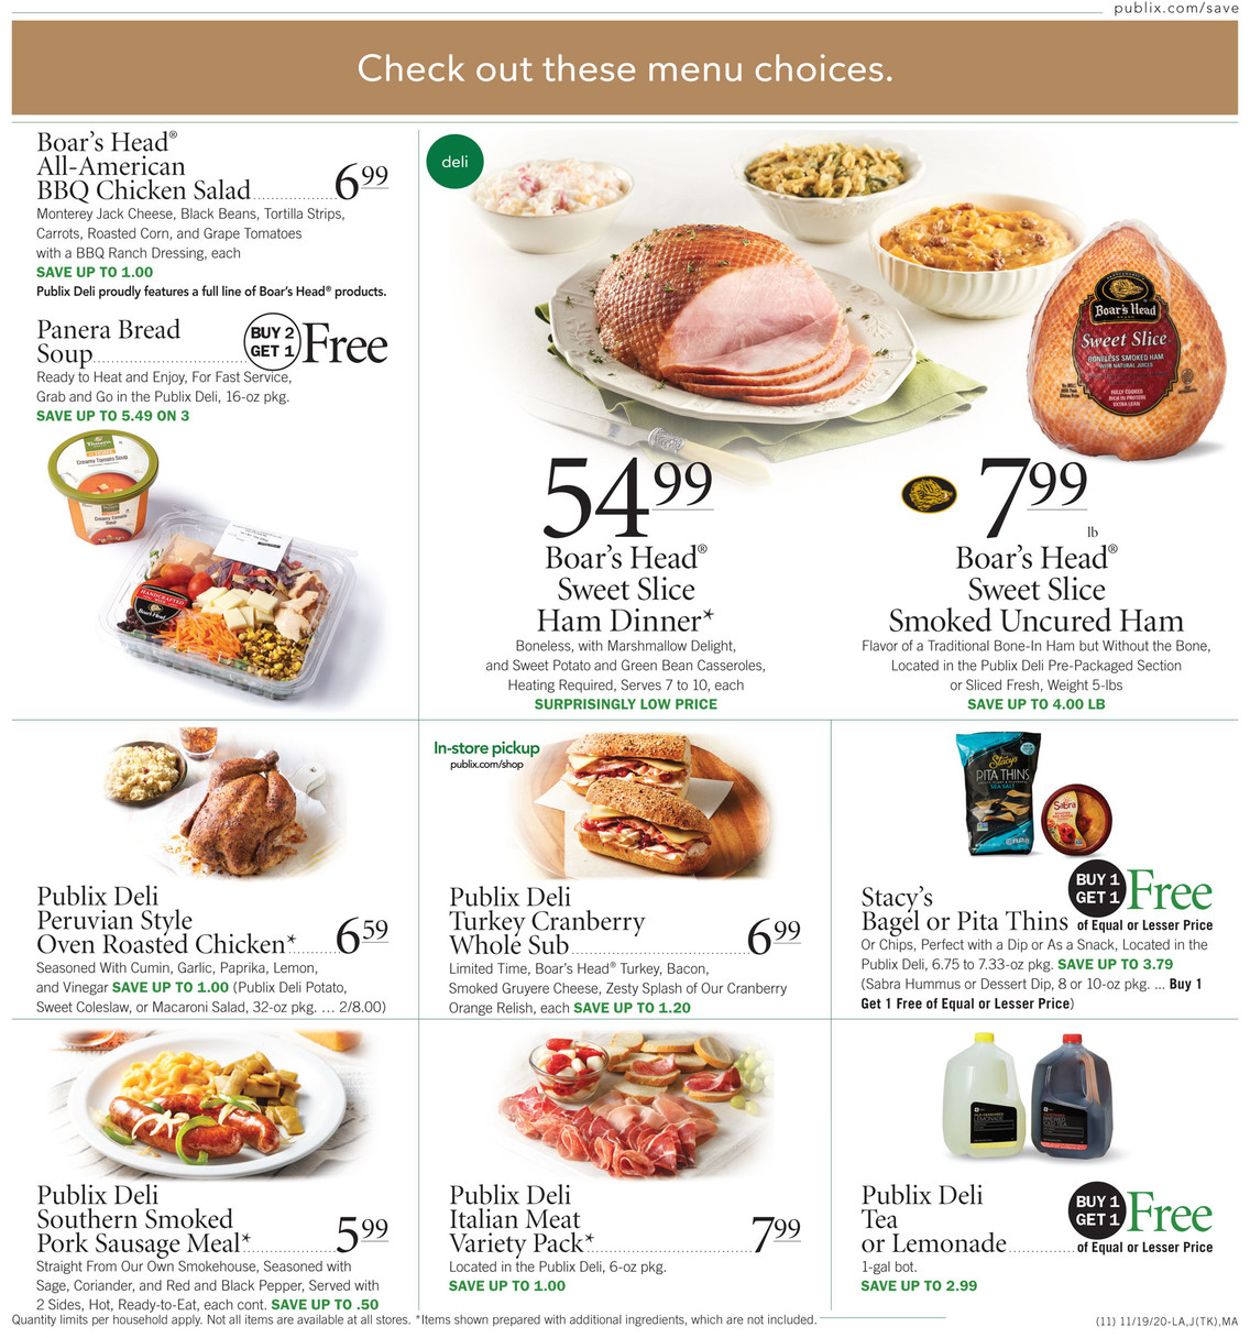 Christmas Dinner From Publix Get Christmas Day Dinner To Go From